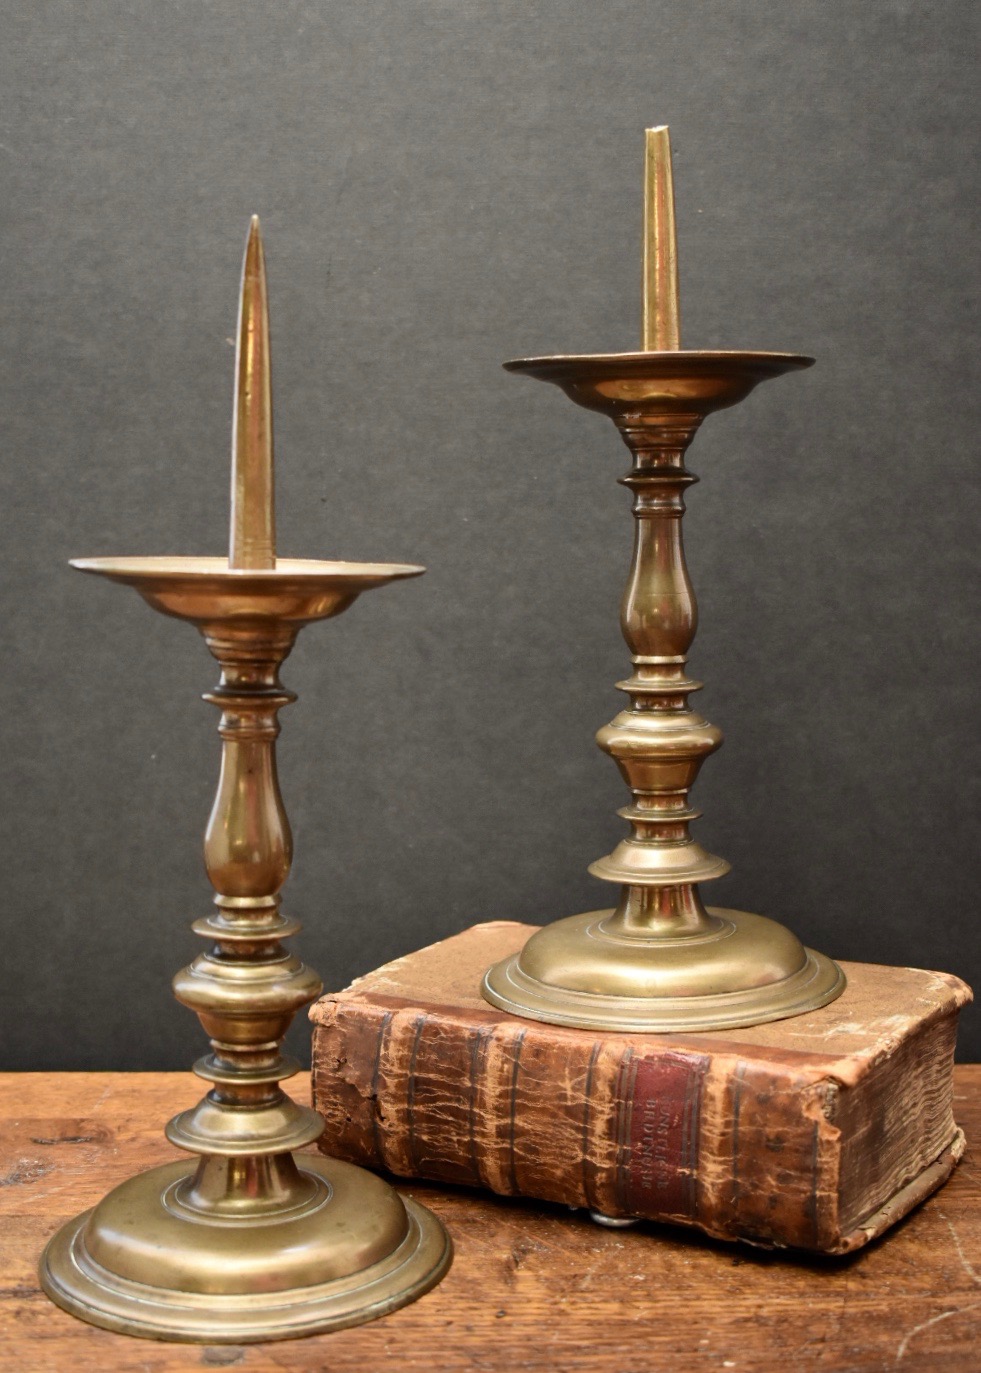 Assembled Pair of Brass Pricket Sticks, 18th/19th C sold at